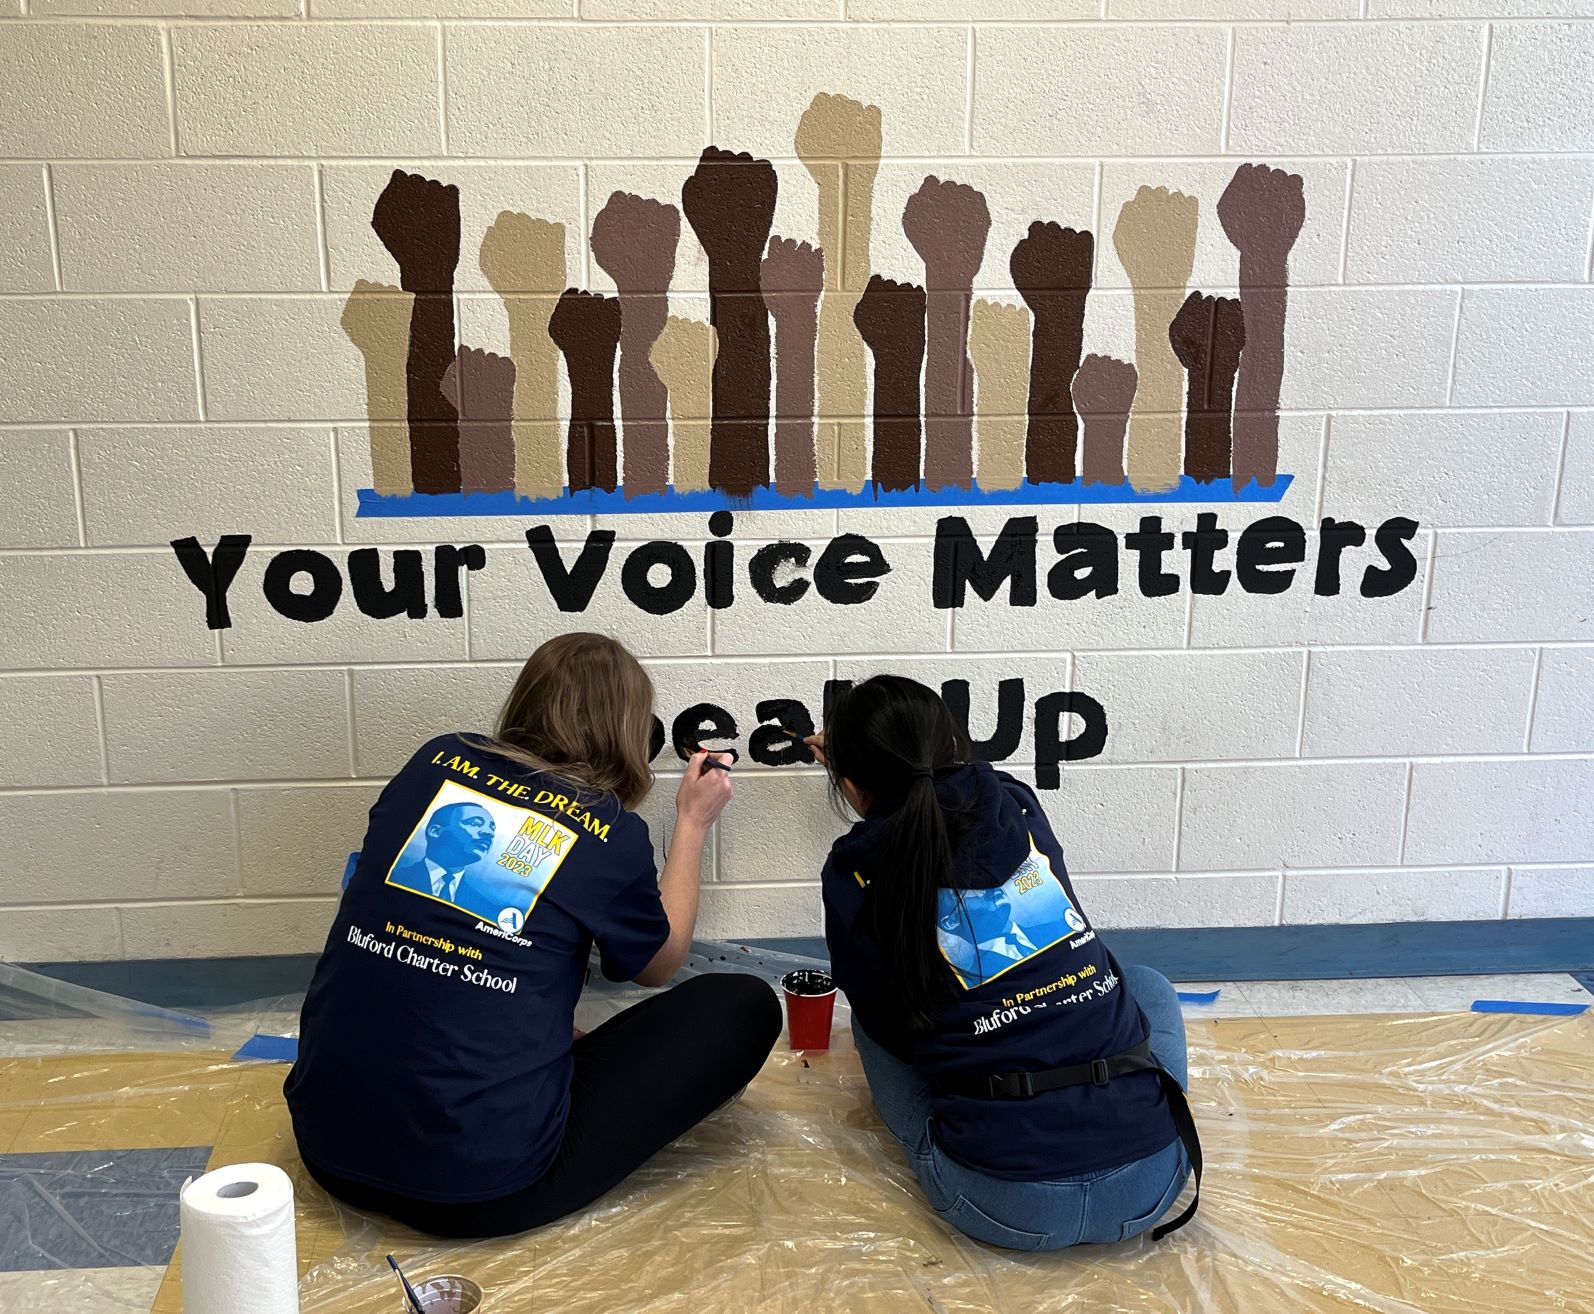 MLK Voice 4 Youth - ATT'N HIGH SCHOOL STUDENTS, WHAT MATTERS TO YOU? MLK  VOICE 4 YOUTH is your platform to speak up about things that matter to YOU!  Climate change? housing?